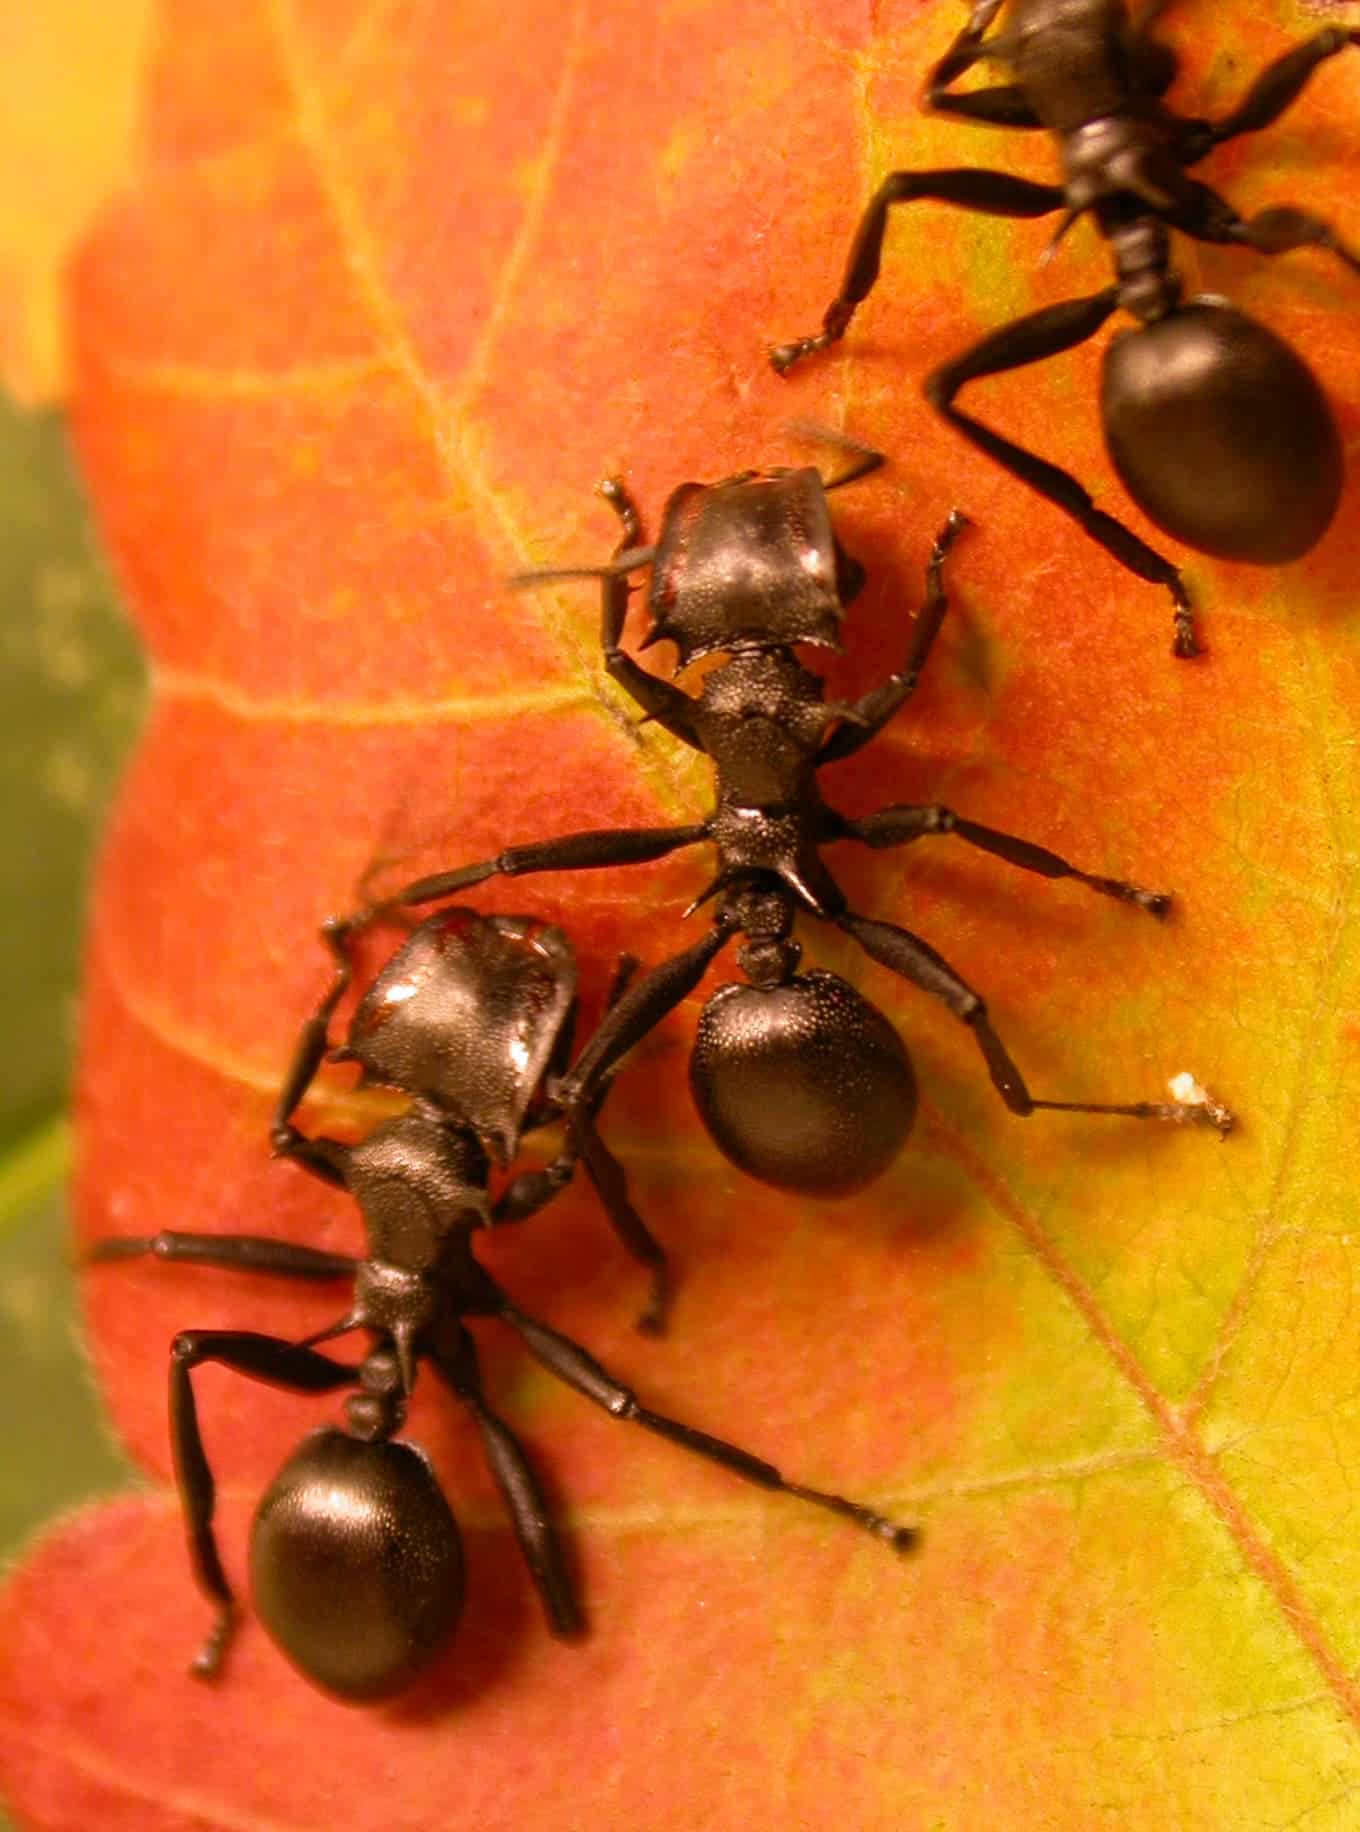 Arboreal ants that have evolved closely with the trees they live in. Image credits: Field Museum / Corrie Moreau.